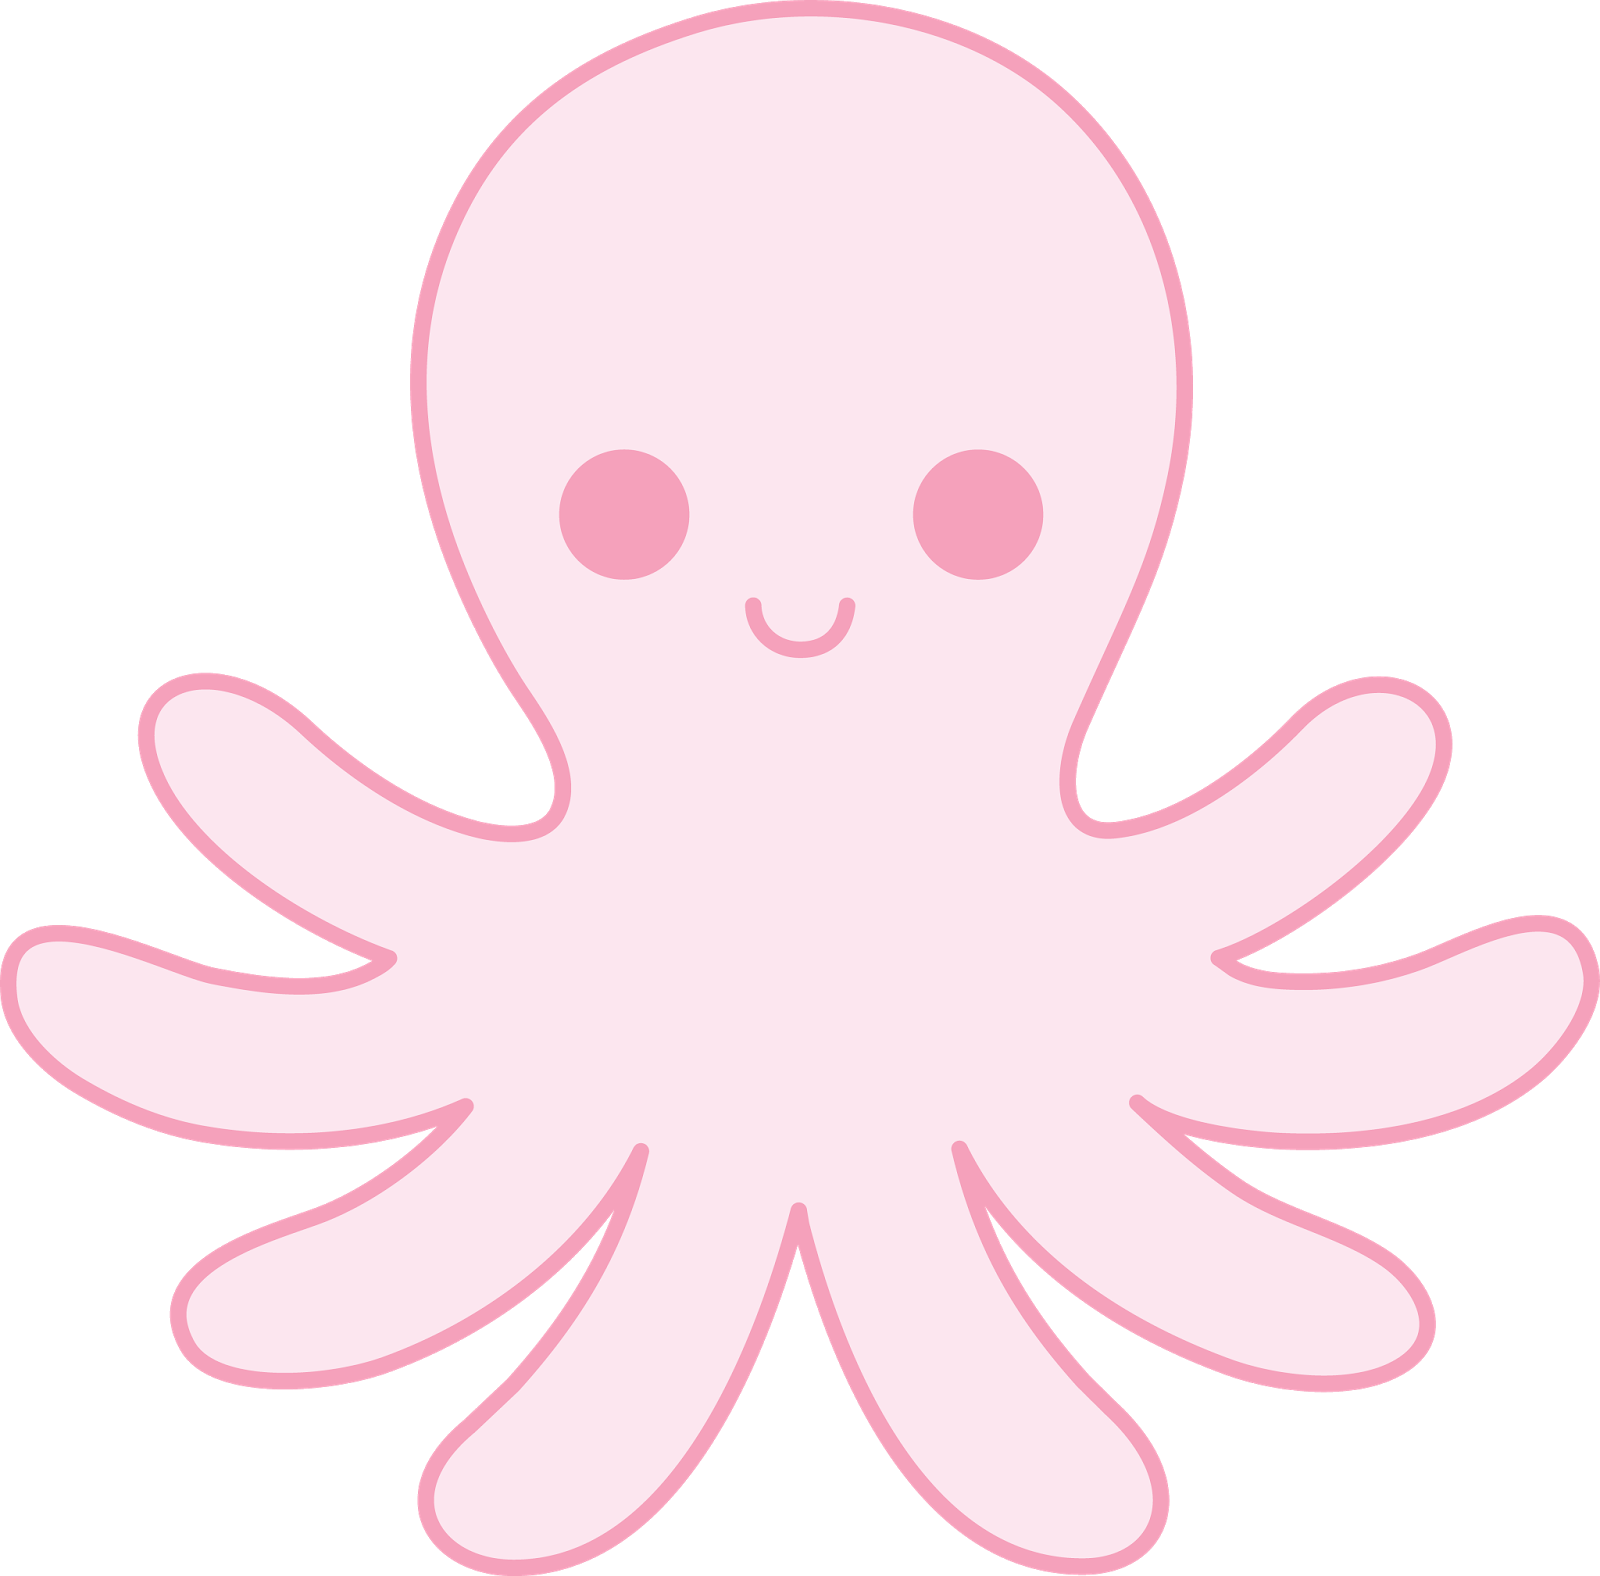 octopus clipart blue ringed octopus